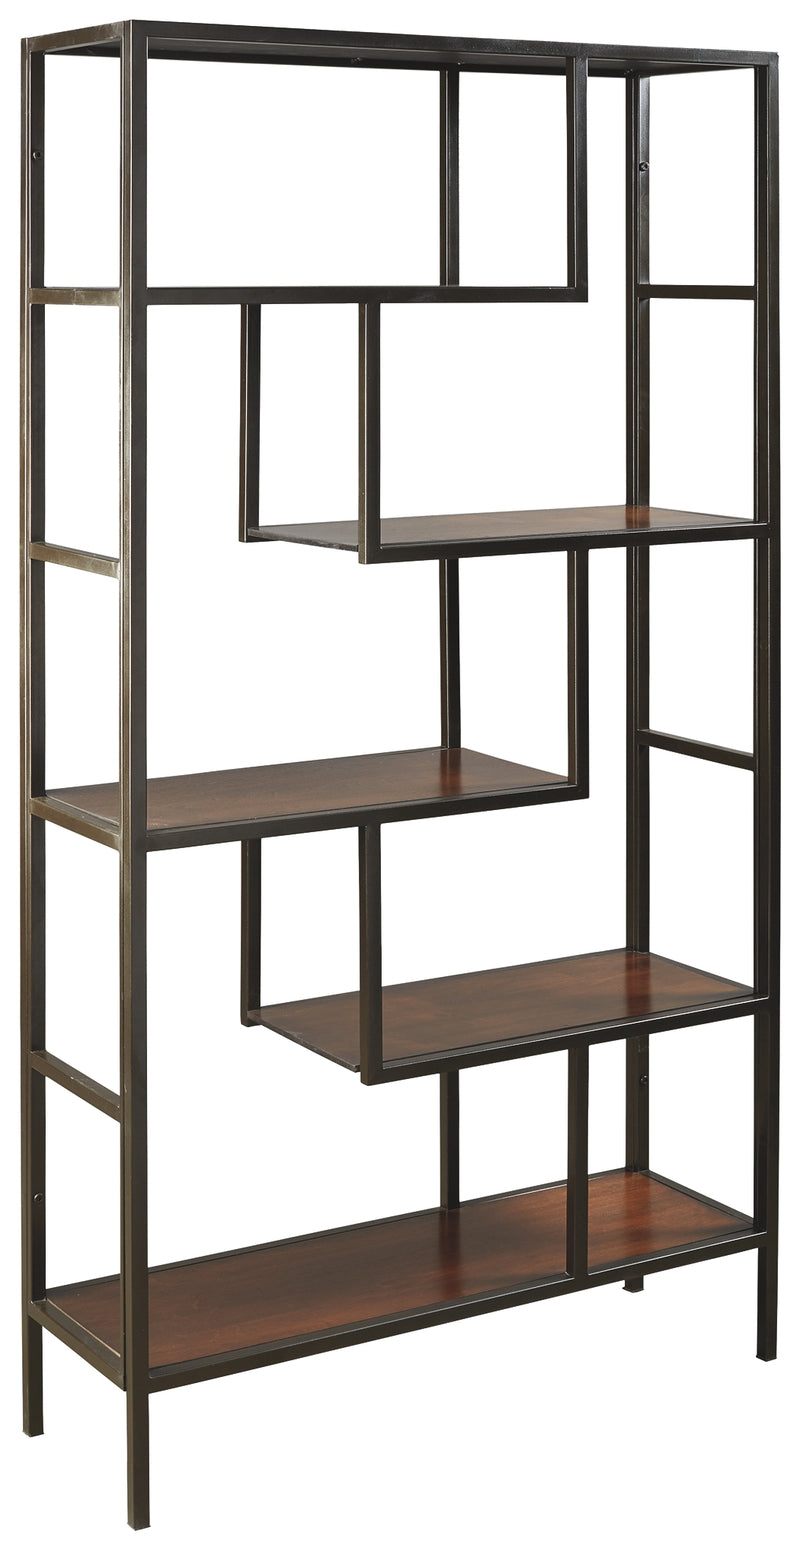 Frankwell A4000021 BrownBlack Bookcase